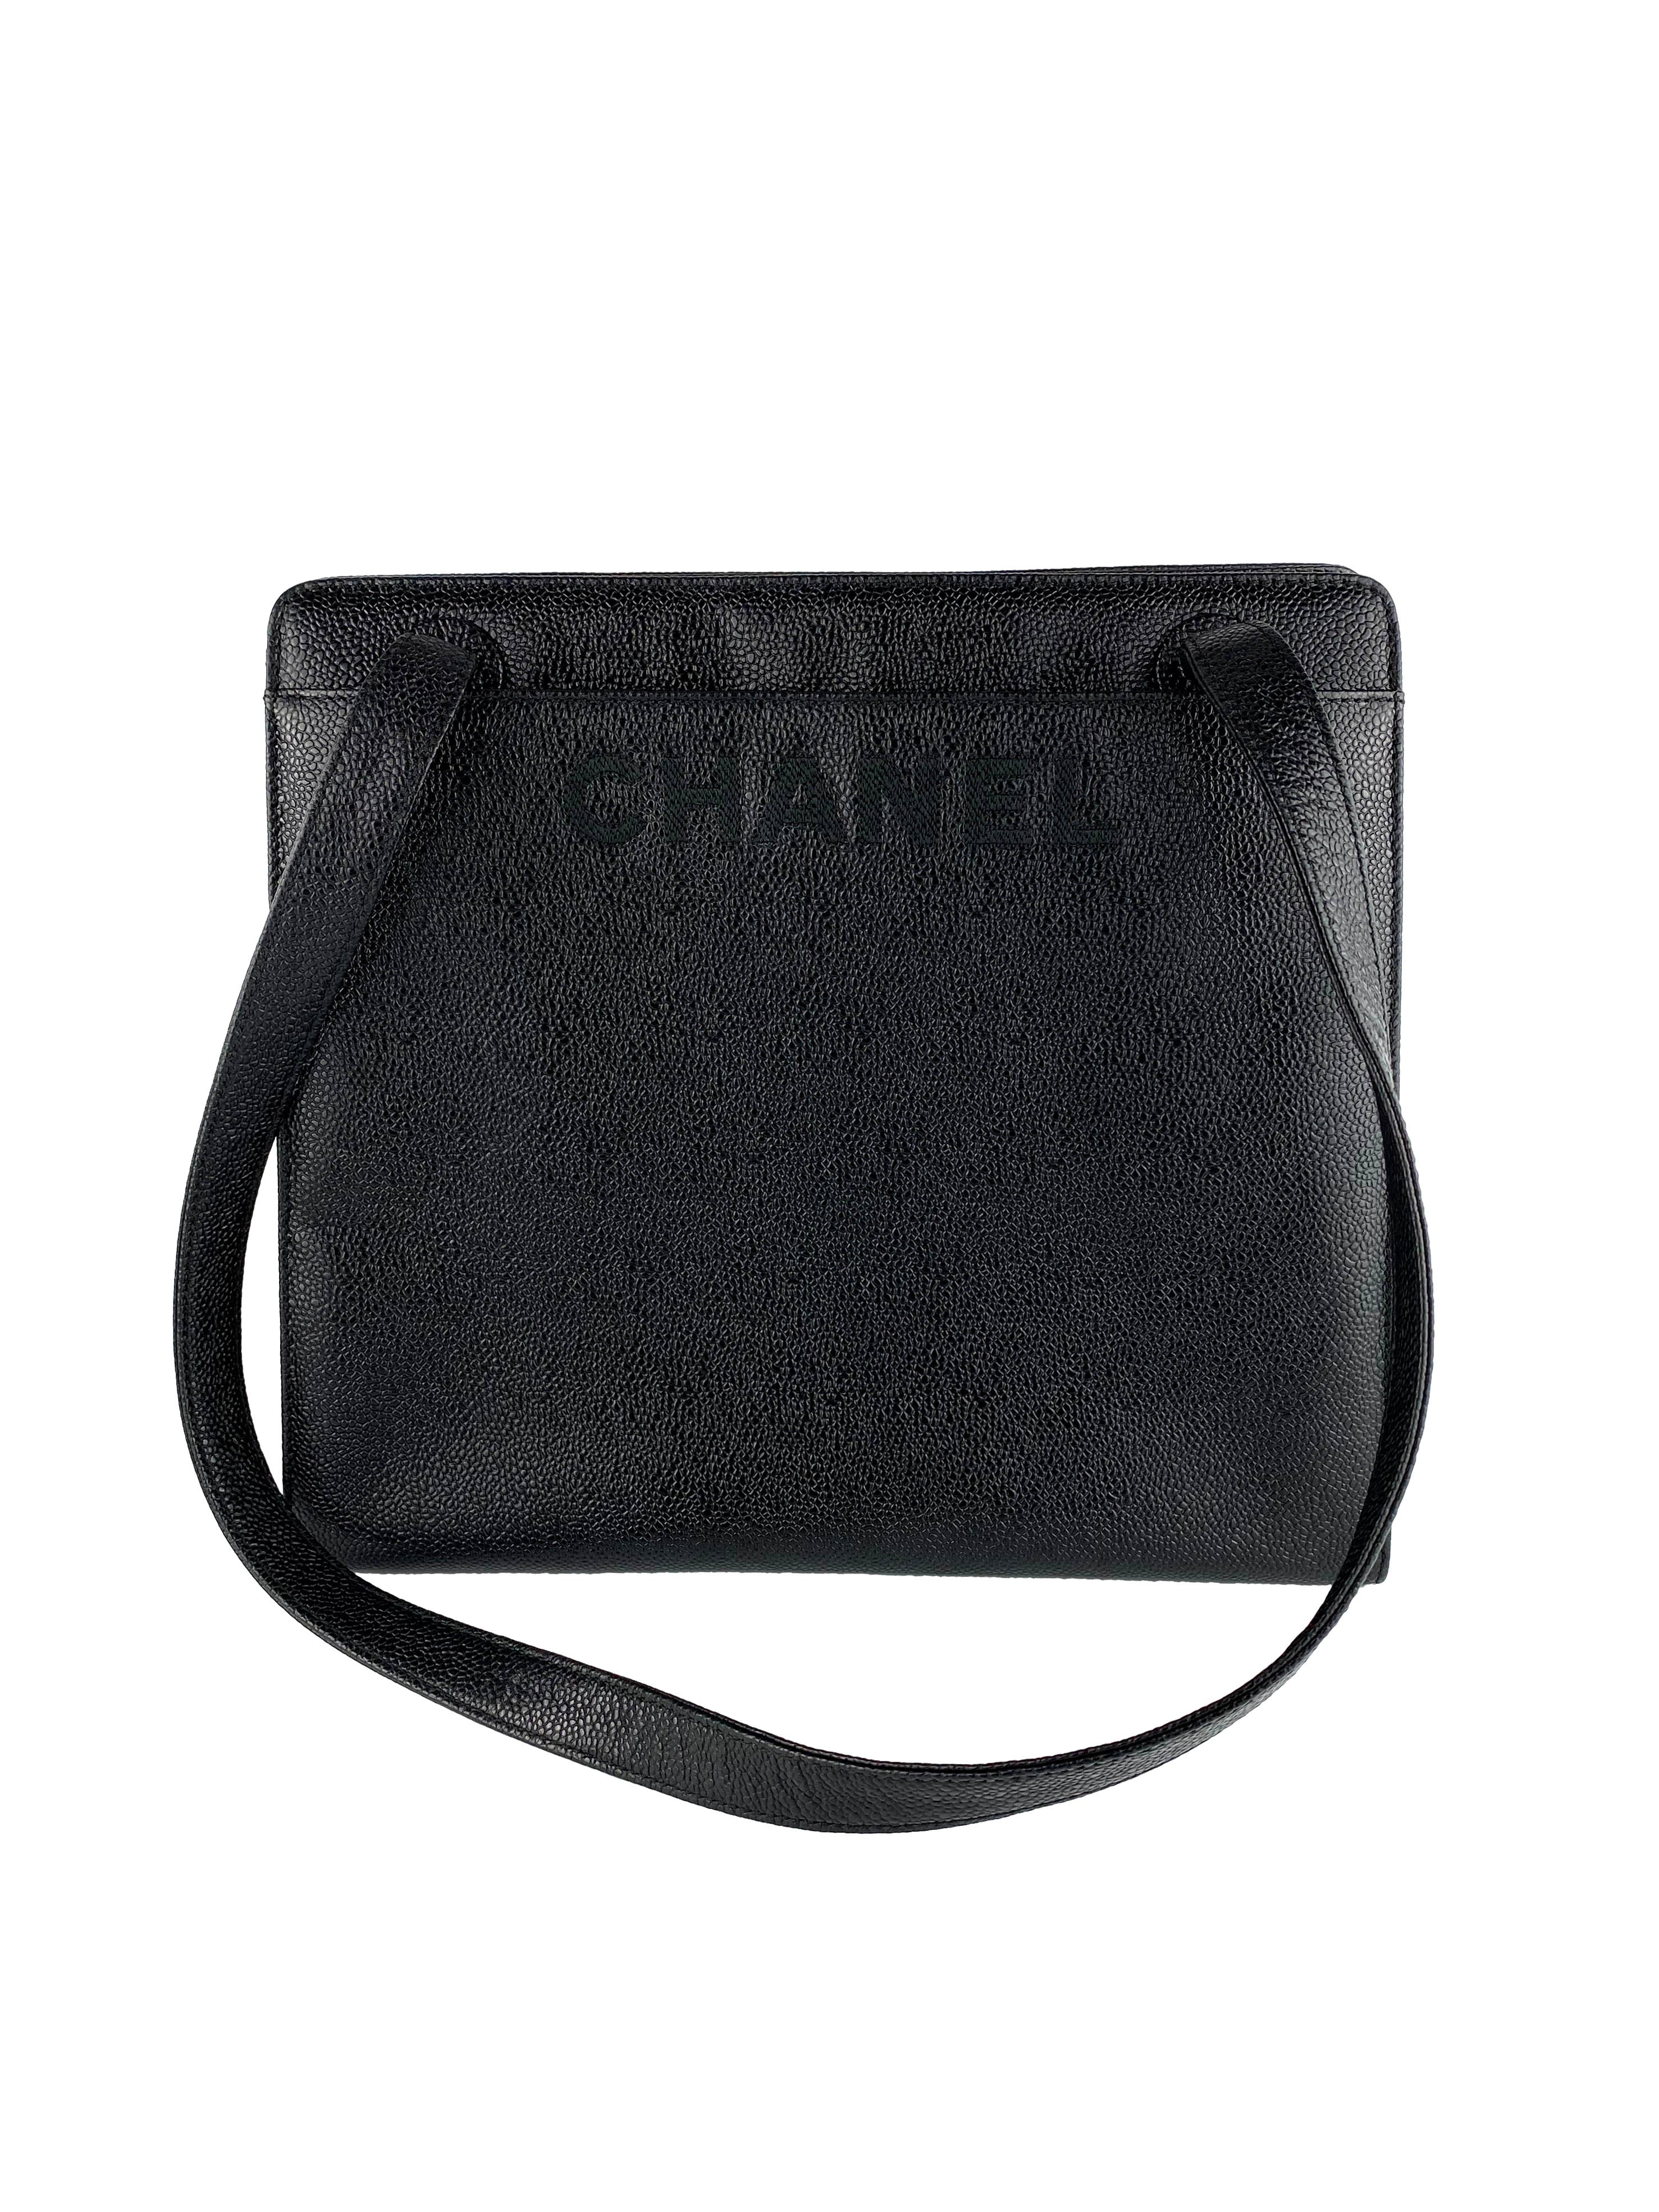 Chanel Vintage Black Tote with Stitched Logo